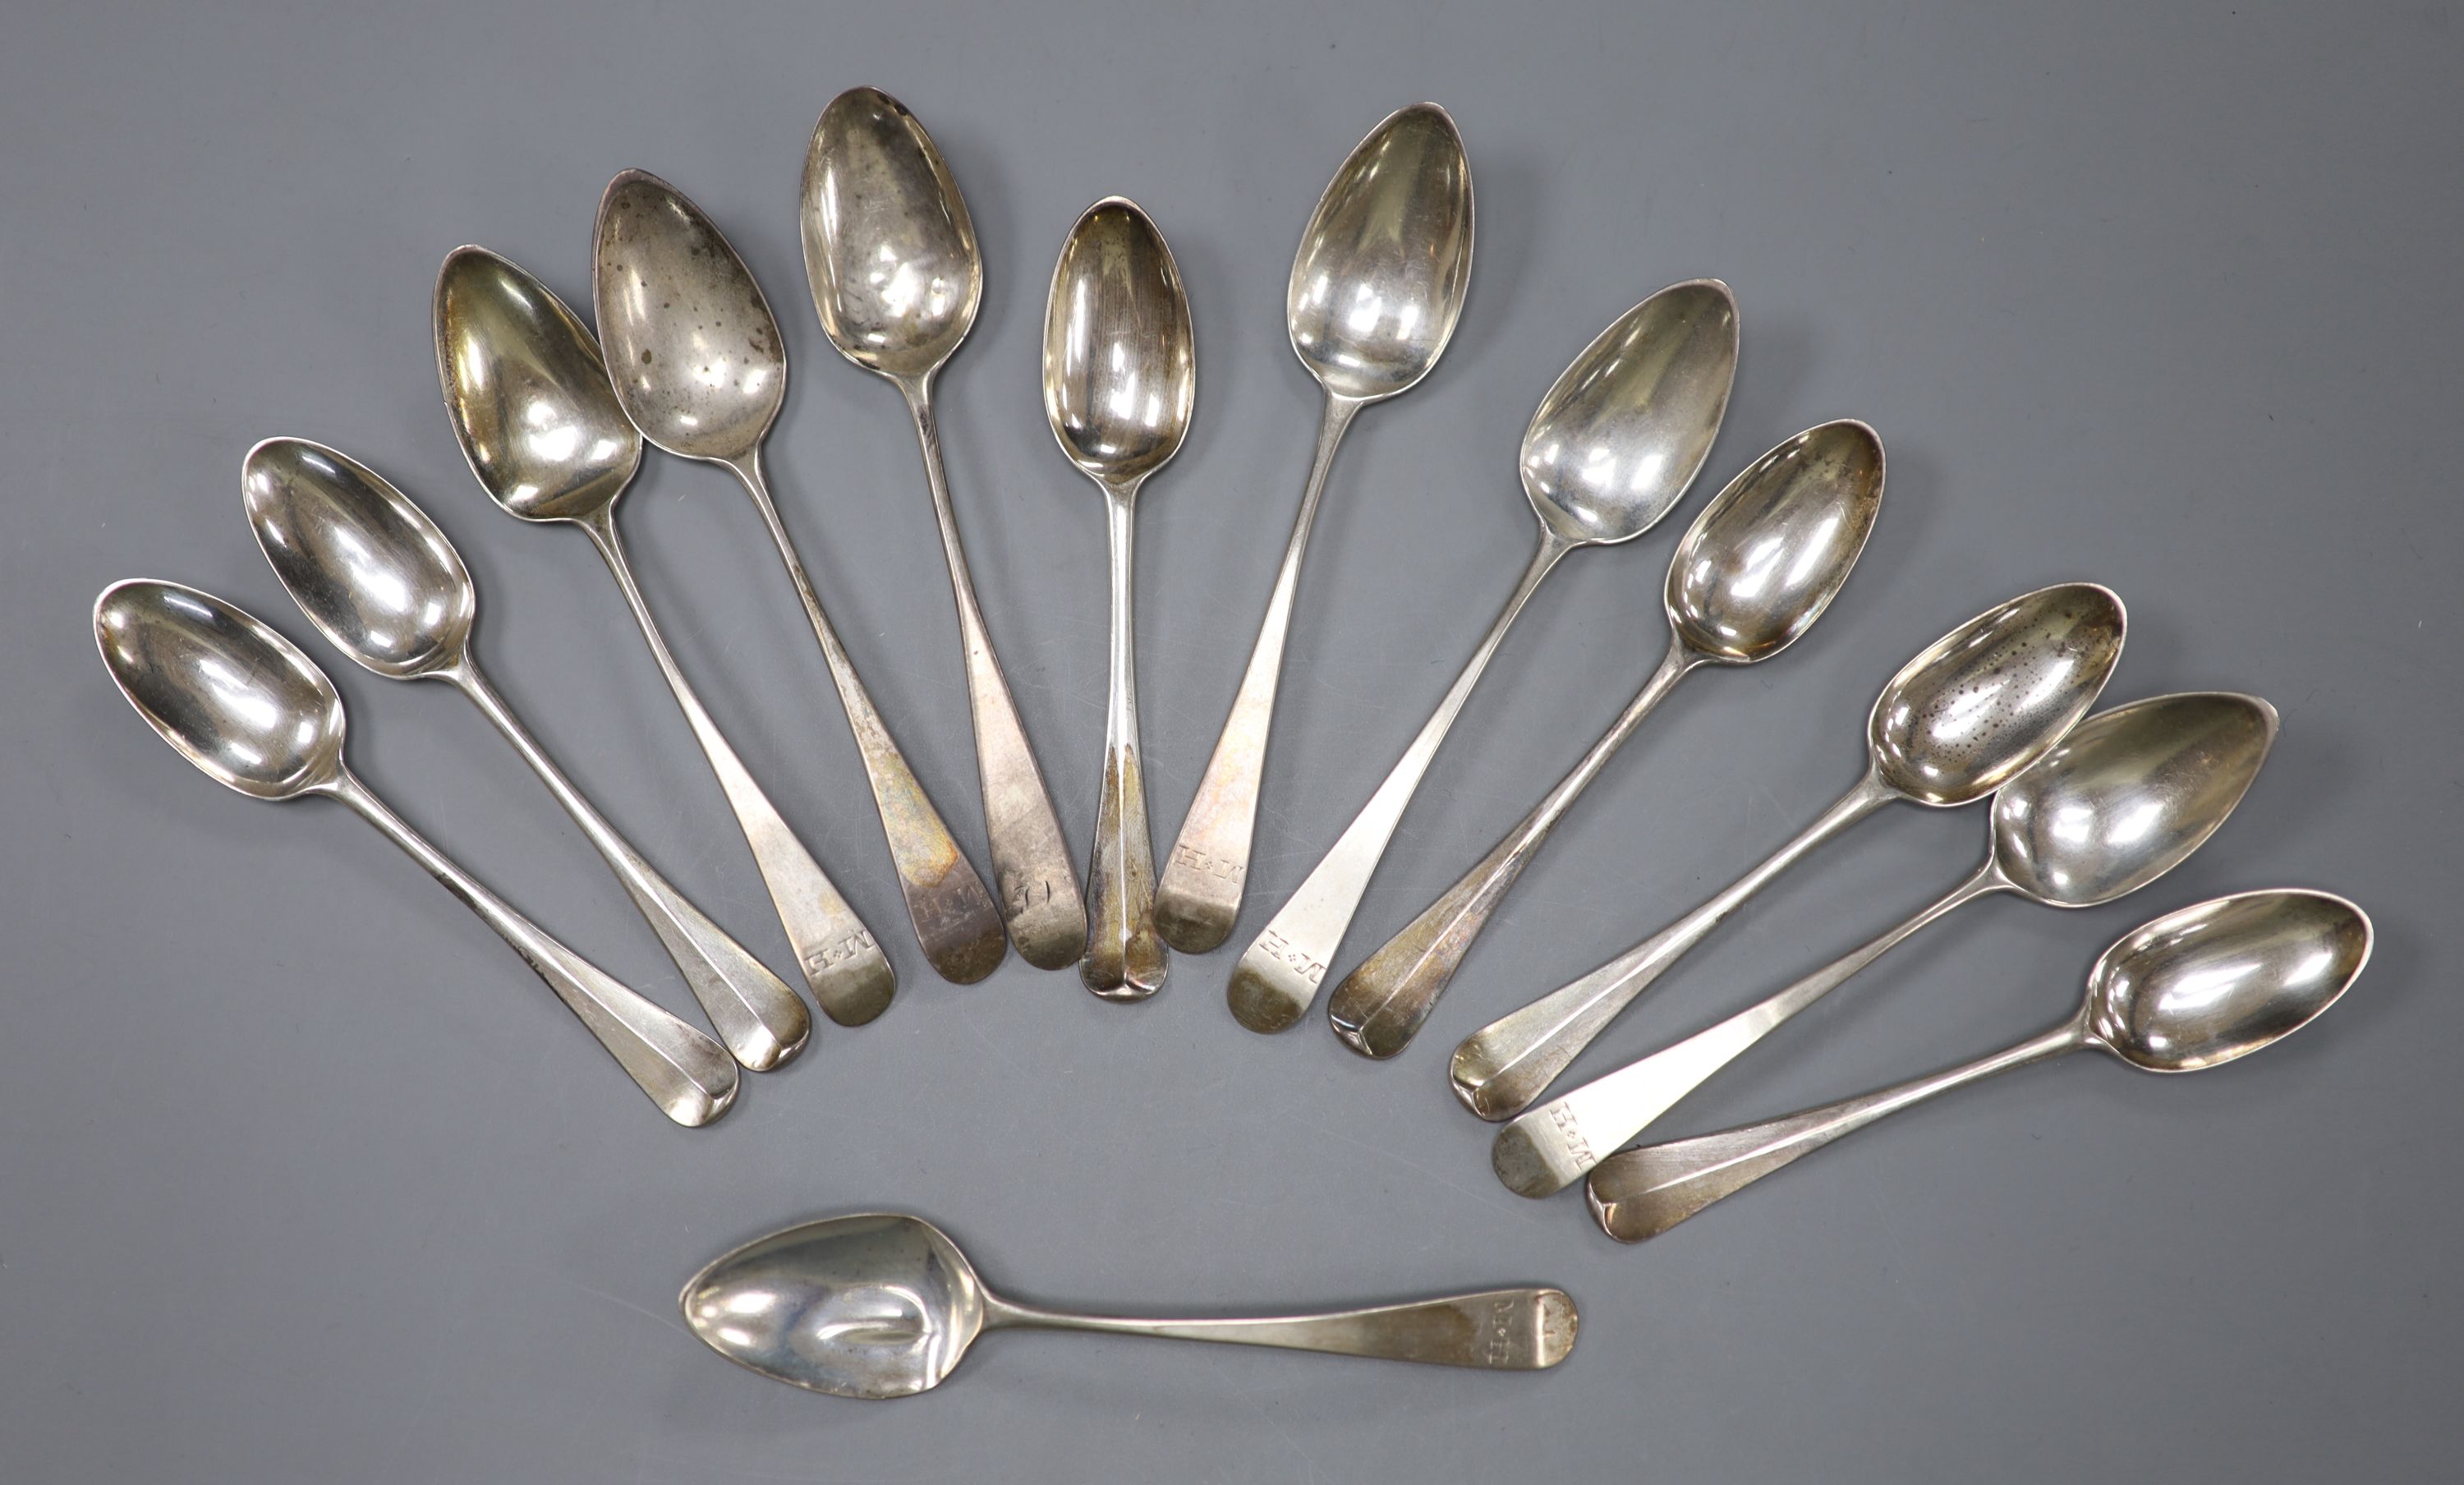 A set of six George III silver Old English pattern teaspoons, by Peter, Ann & William Bateman, London, 1800, one other set of six Georgian silver teaspoons and one Scottish silver teaspoon